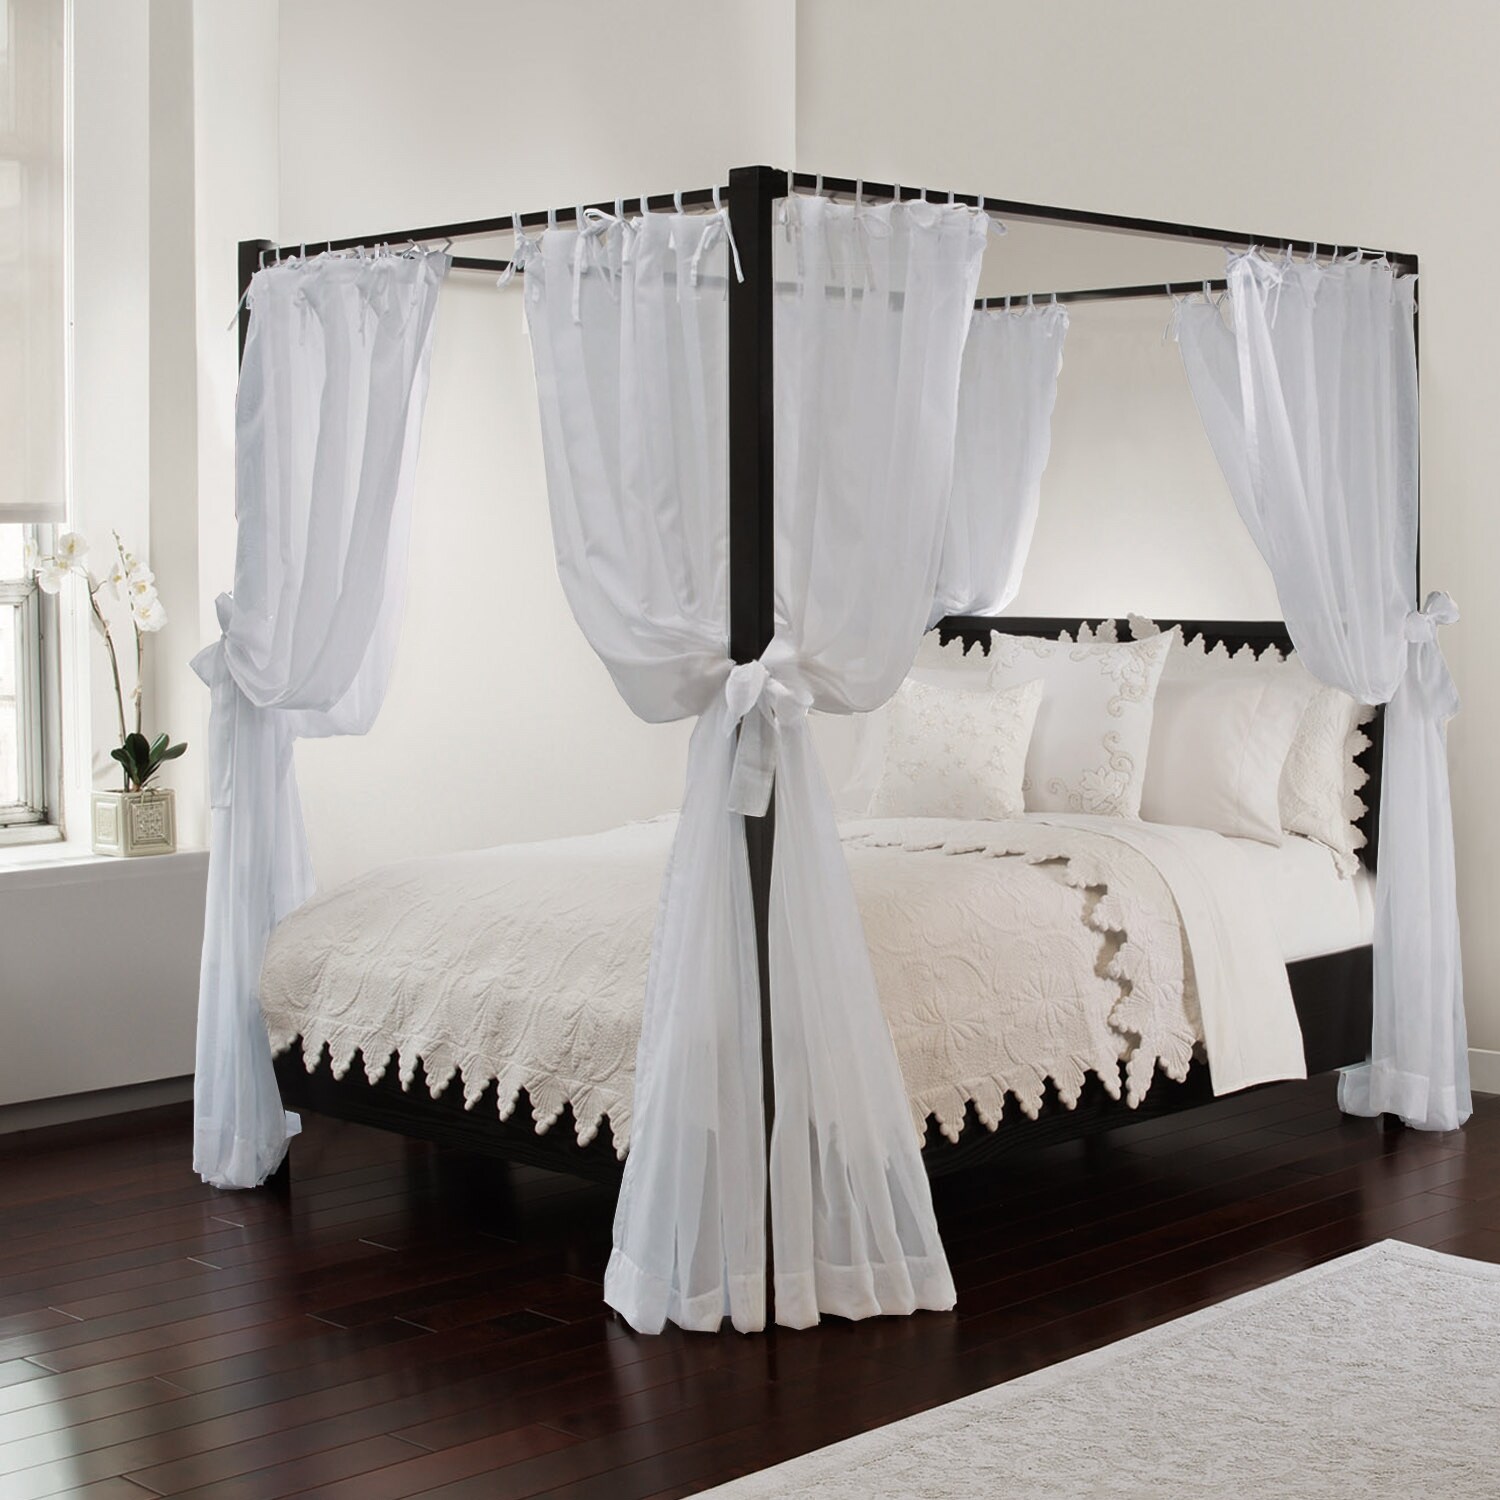 Royale Home Tie Sheer Bed Canopy Curtains, White - 8 pack